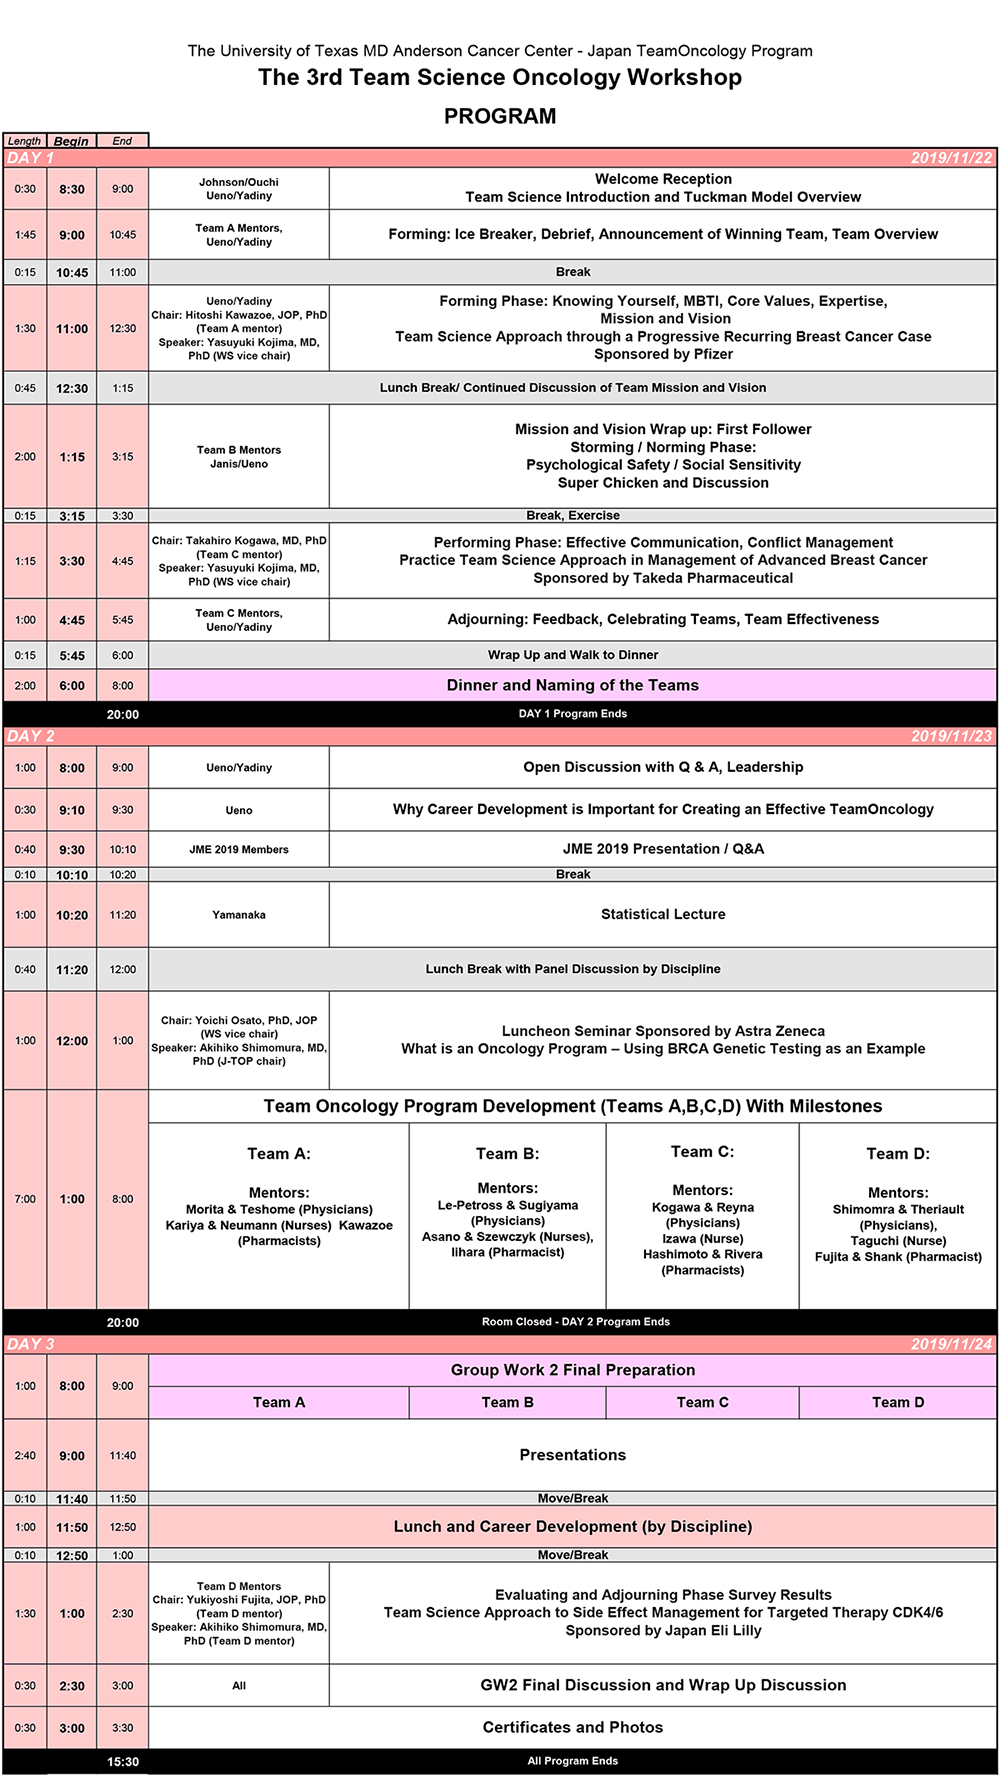 The 3rd Team Science Oncology Workshop プログラム概要